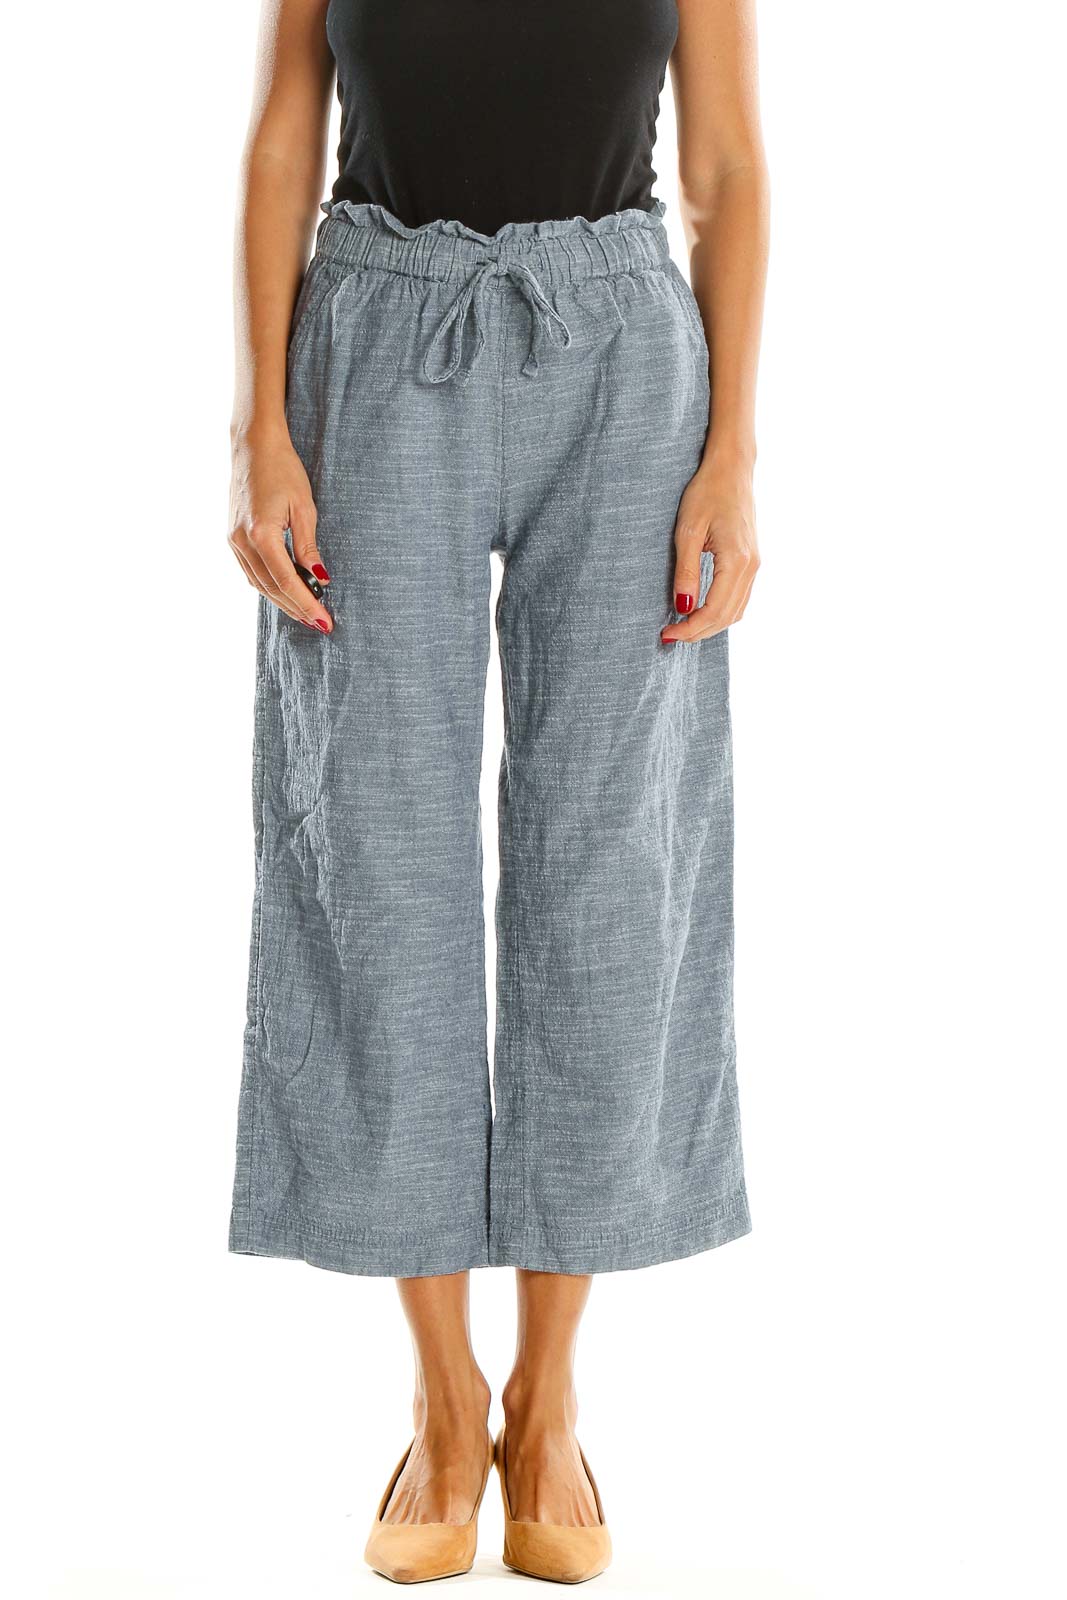 Gray All Day Wear Culottes Pants Front